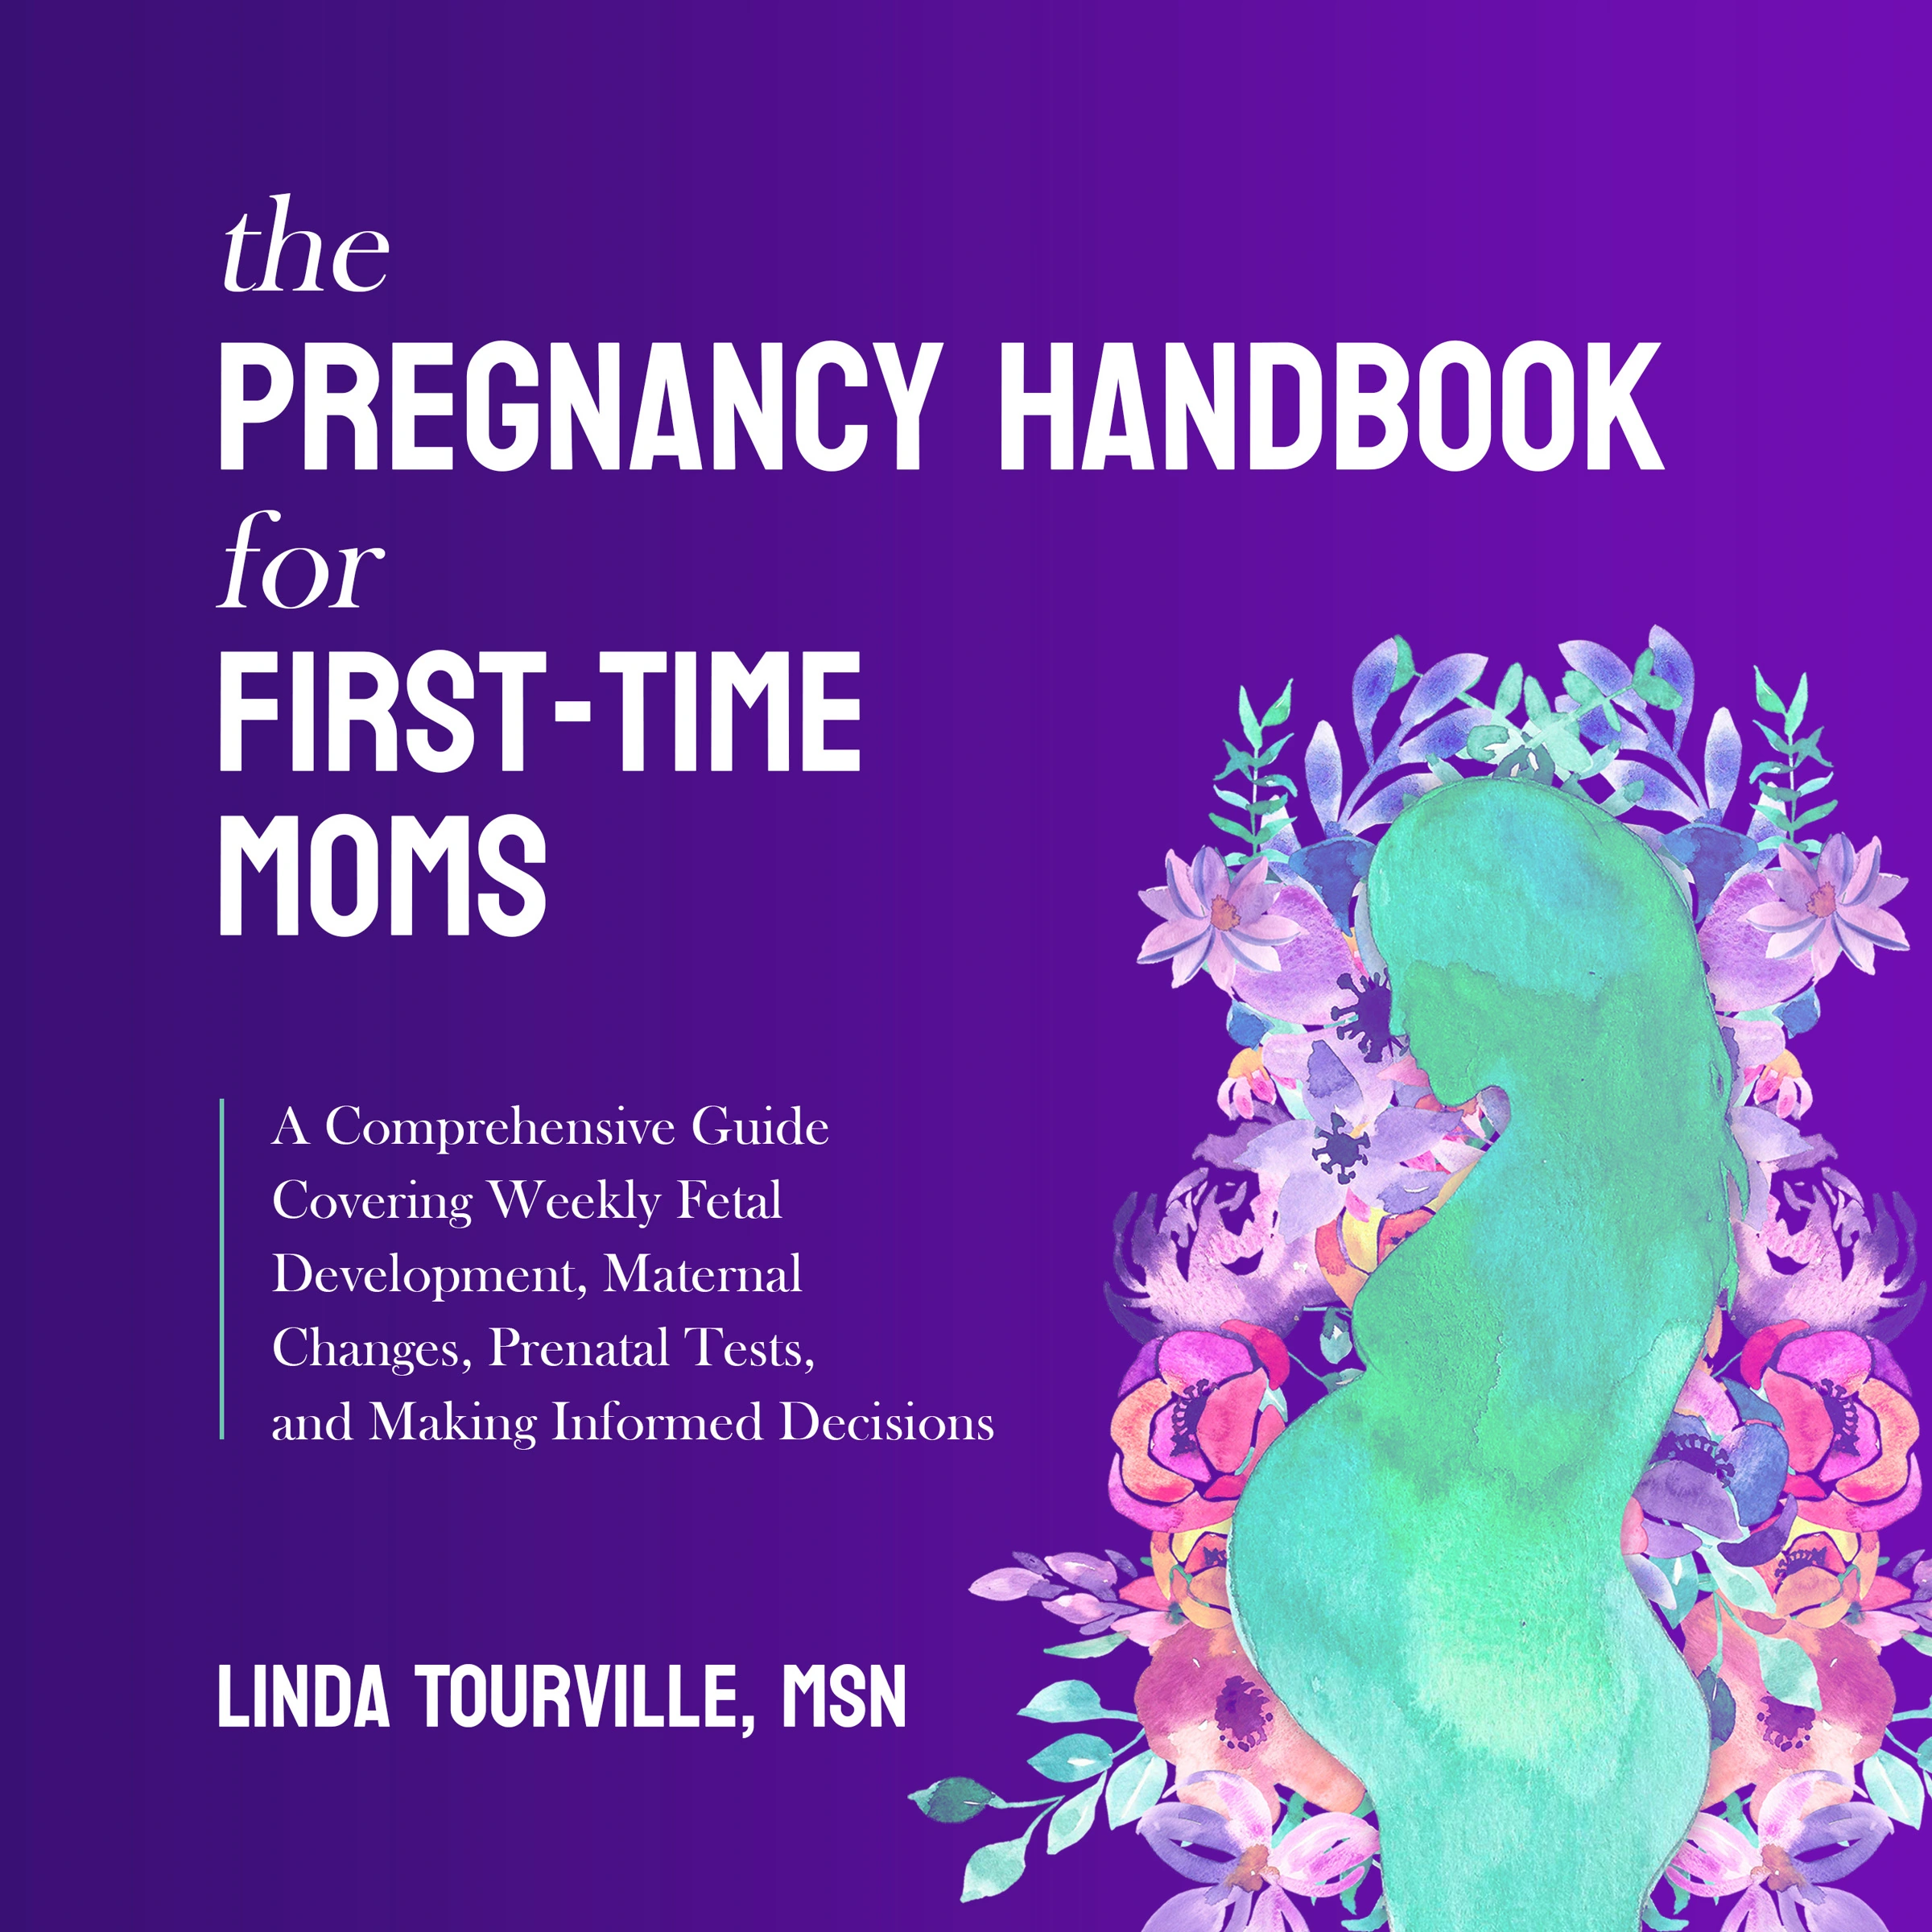 The Pregnancy Handbook for First-Time Moms Audiobook by MSN